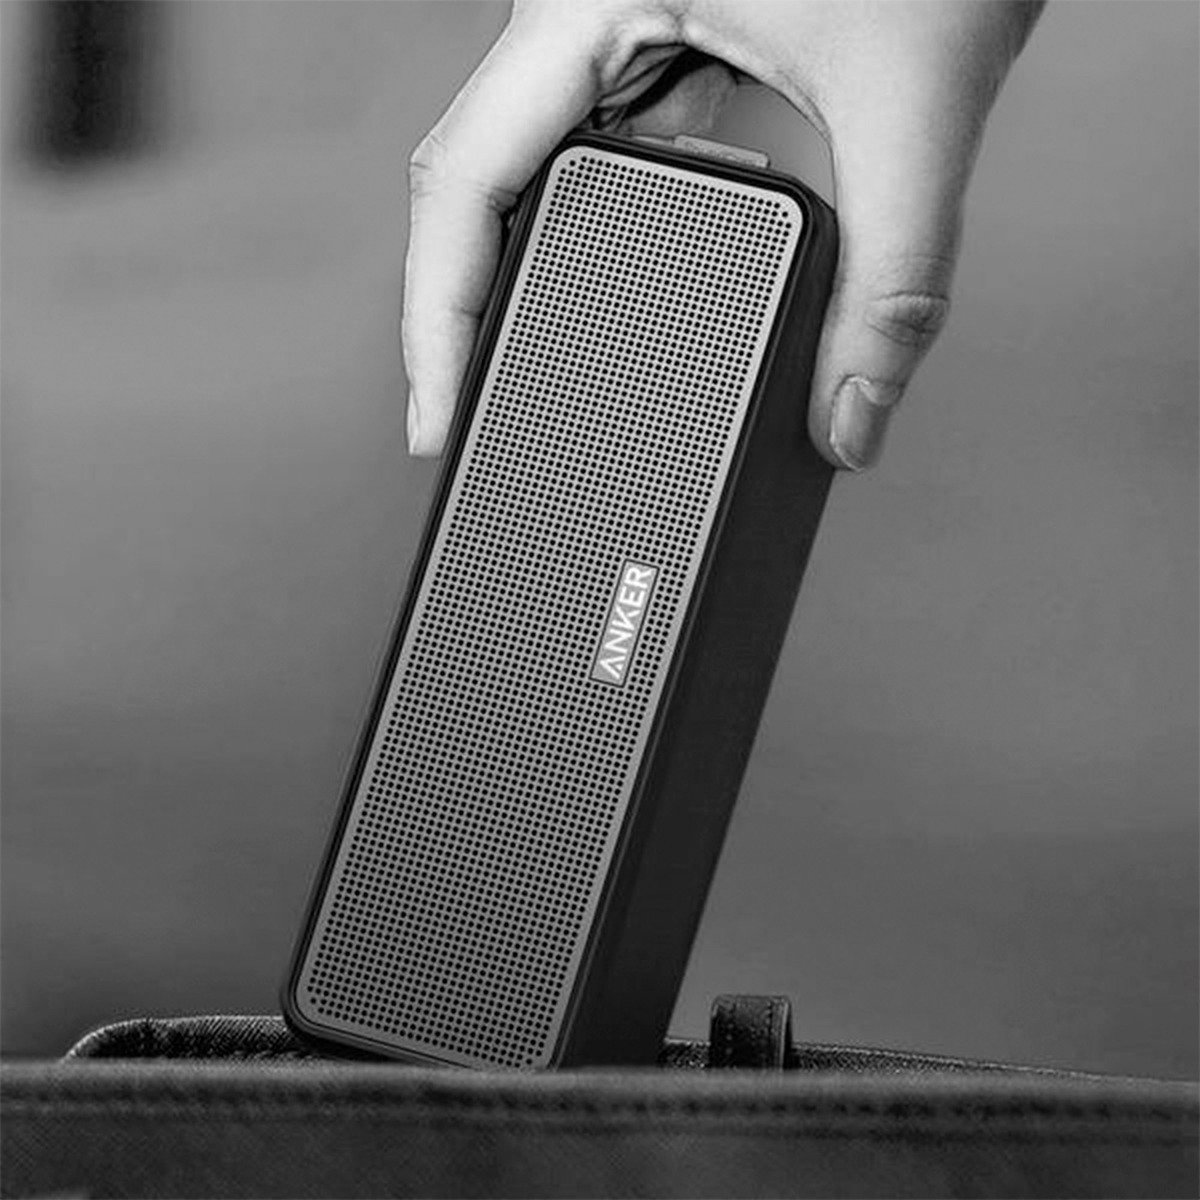 Anker SoundCore Select Bluetooth speaker(A3106H11) Aux, Handsfree, Outdoor, Dust-proof, Water-proof, NFC Black